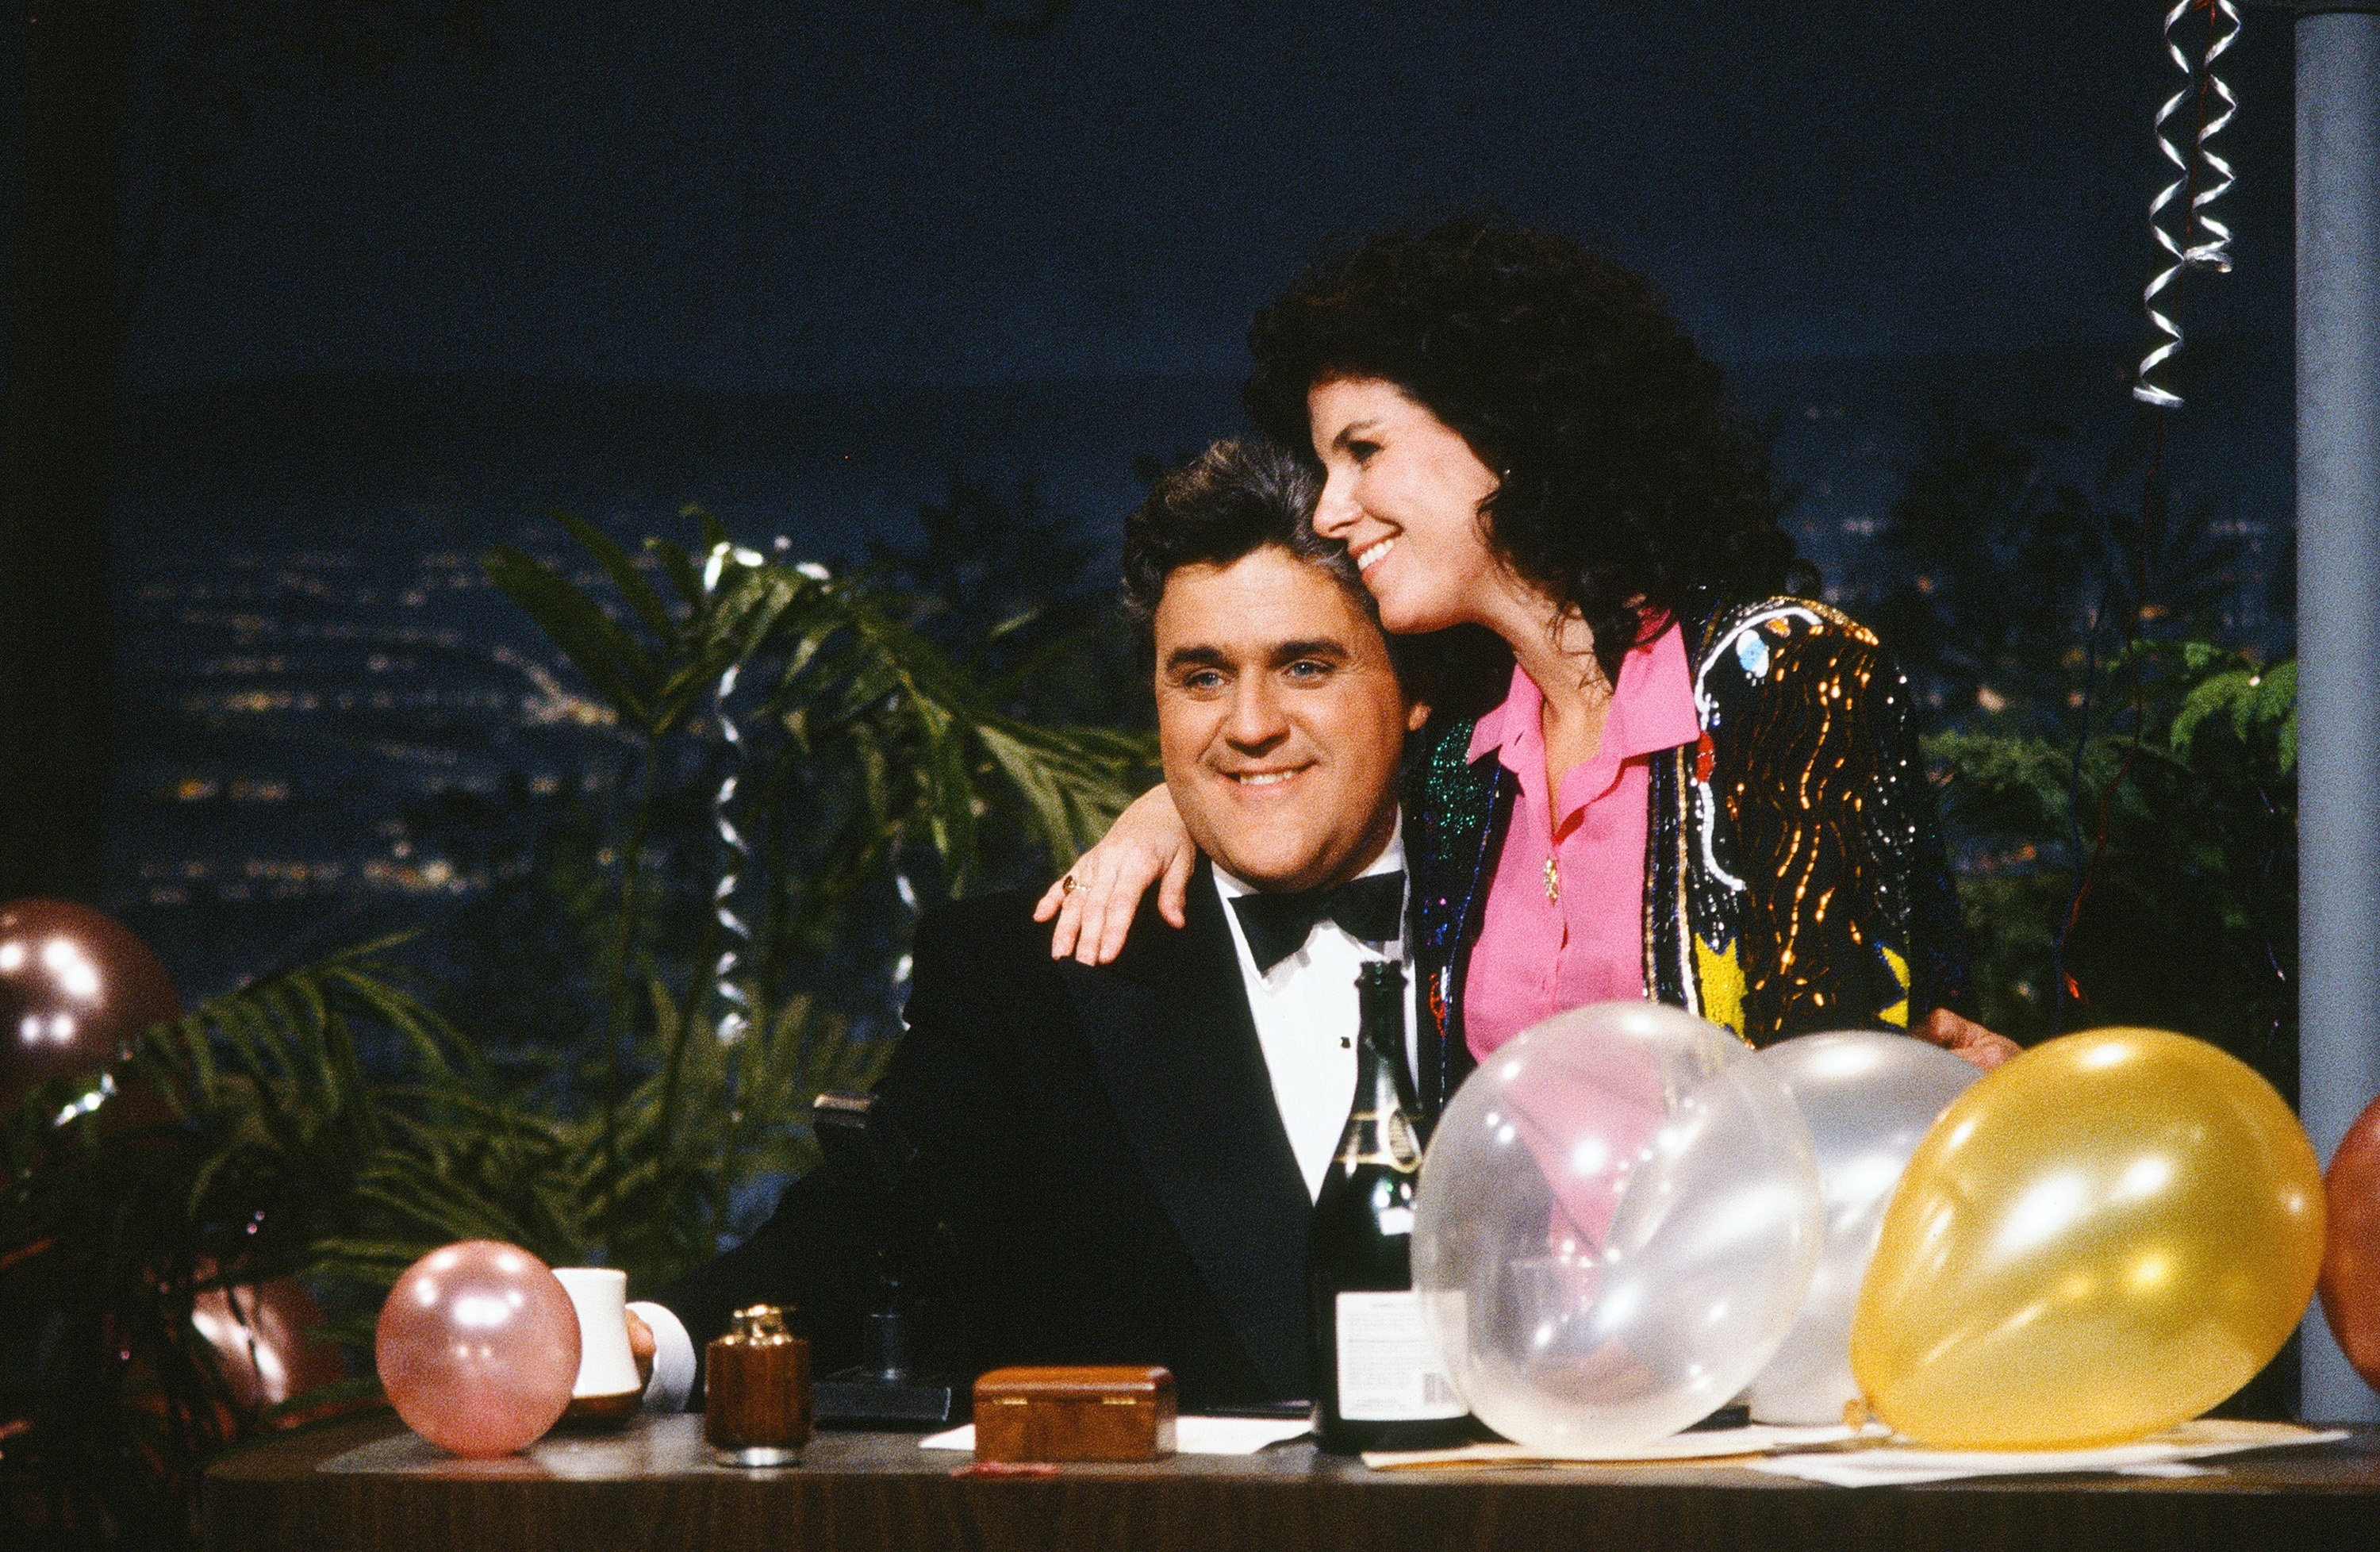 Jay Leno and wife Mavis Leno on December 31, 1990 | Source: Getty Images